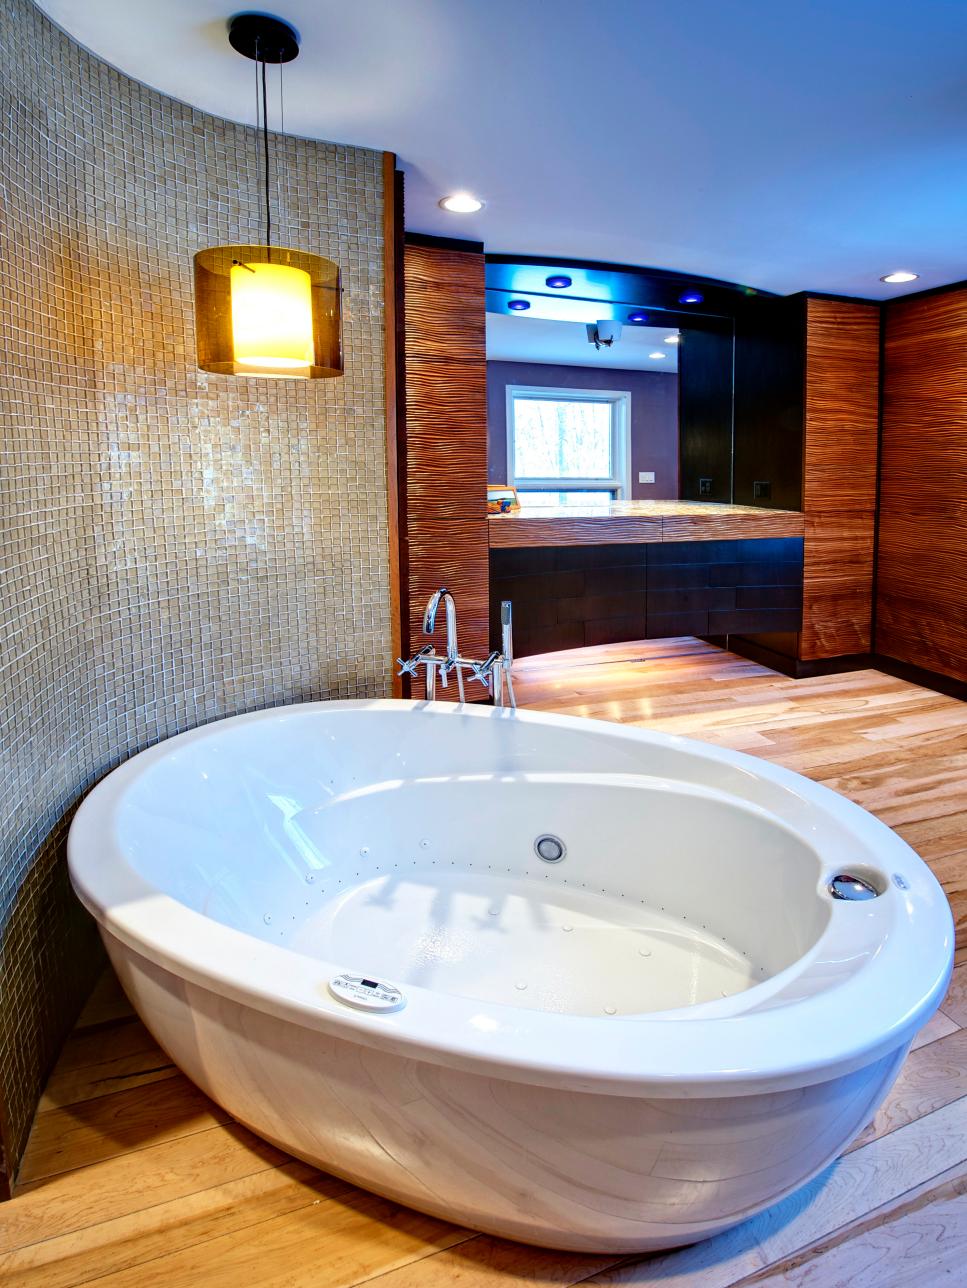  Large  Freestanding Tub  in a Curved Contemporary Bathroom  